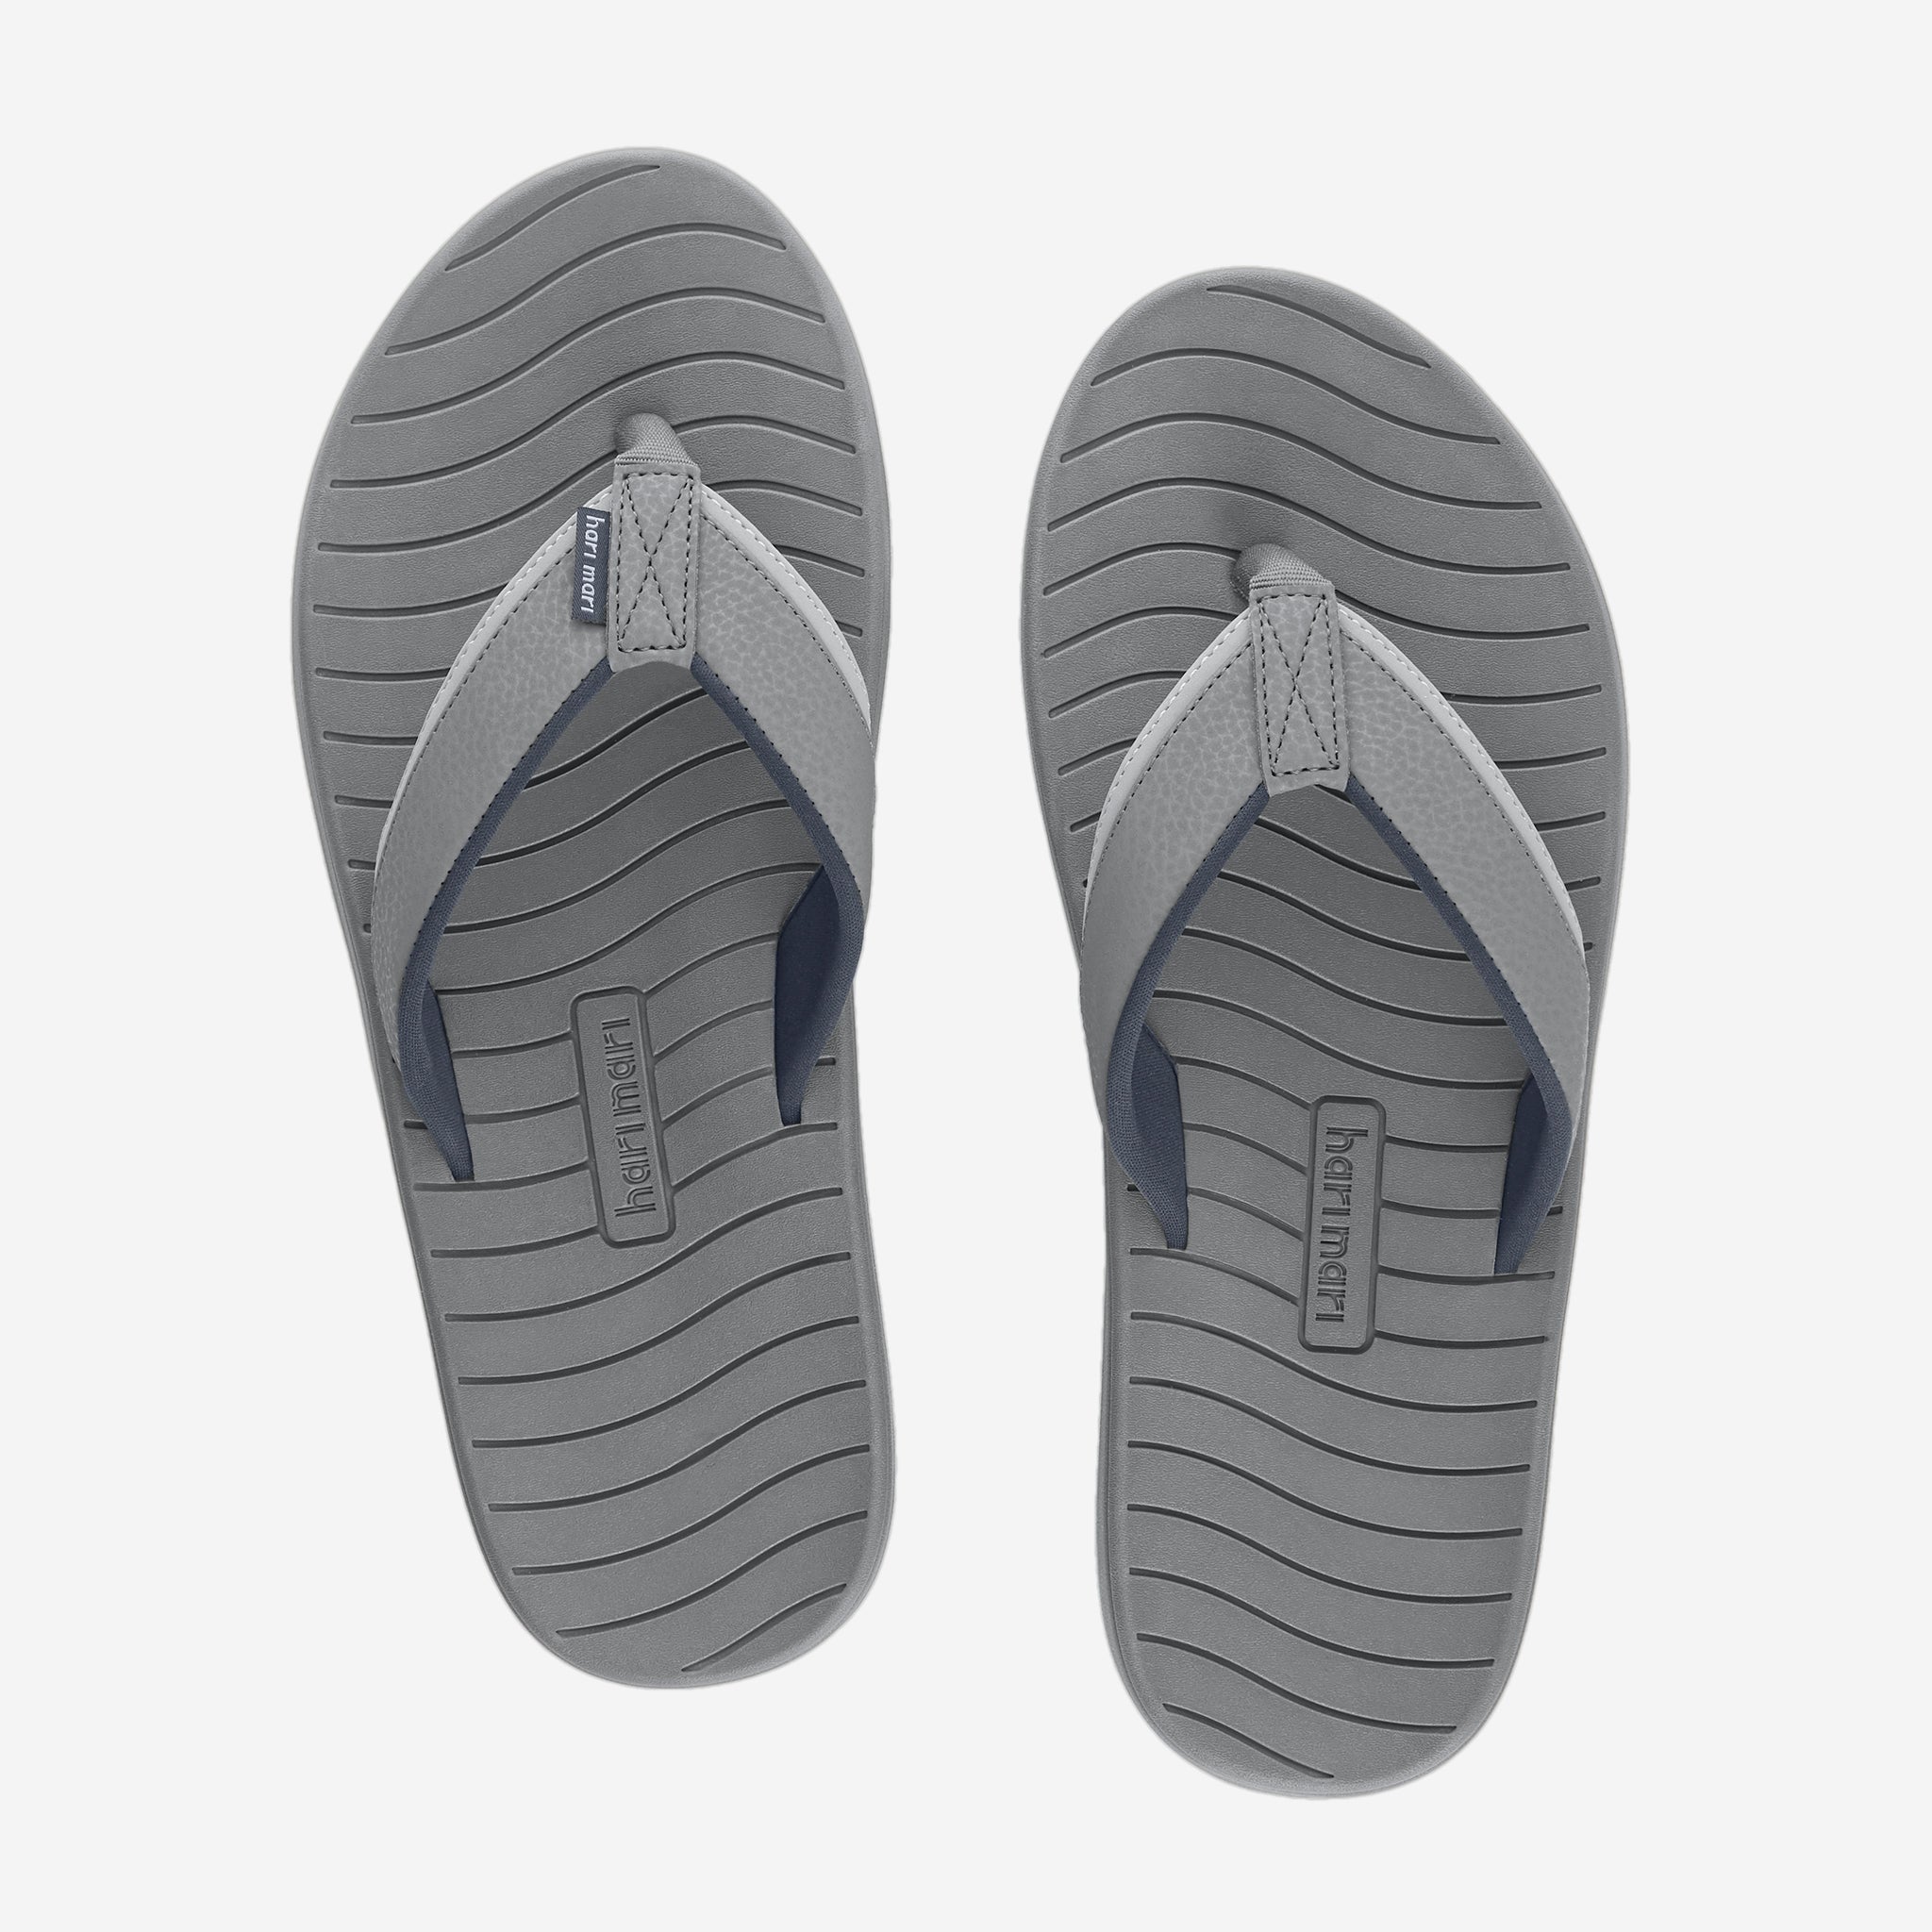 gray rubber flip flops to wear to the pool or beach from Hari Mari